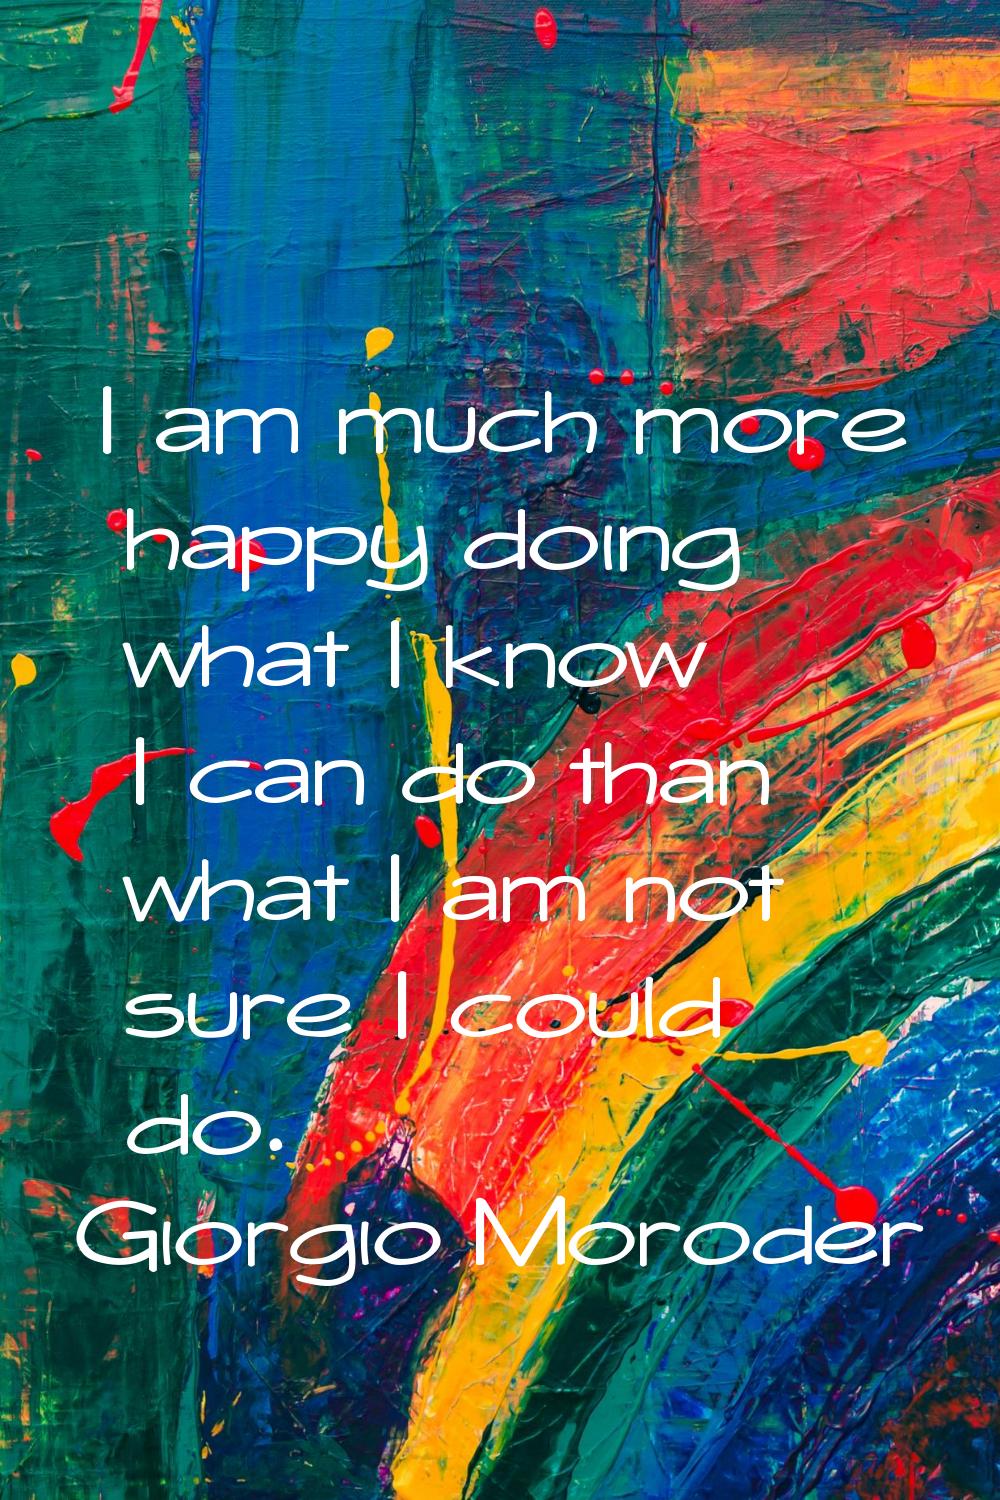 I am much more happy doing what I know I can do than what I am not sure I could do.